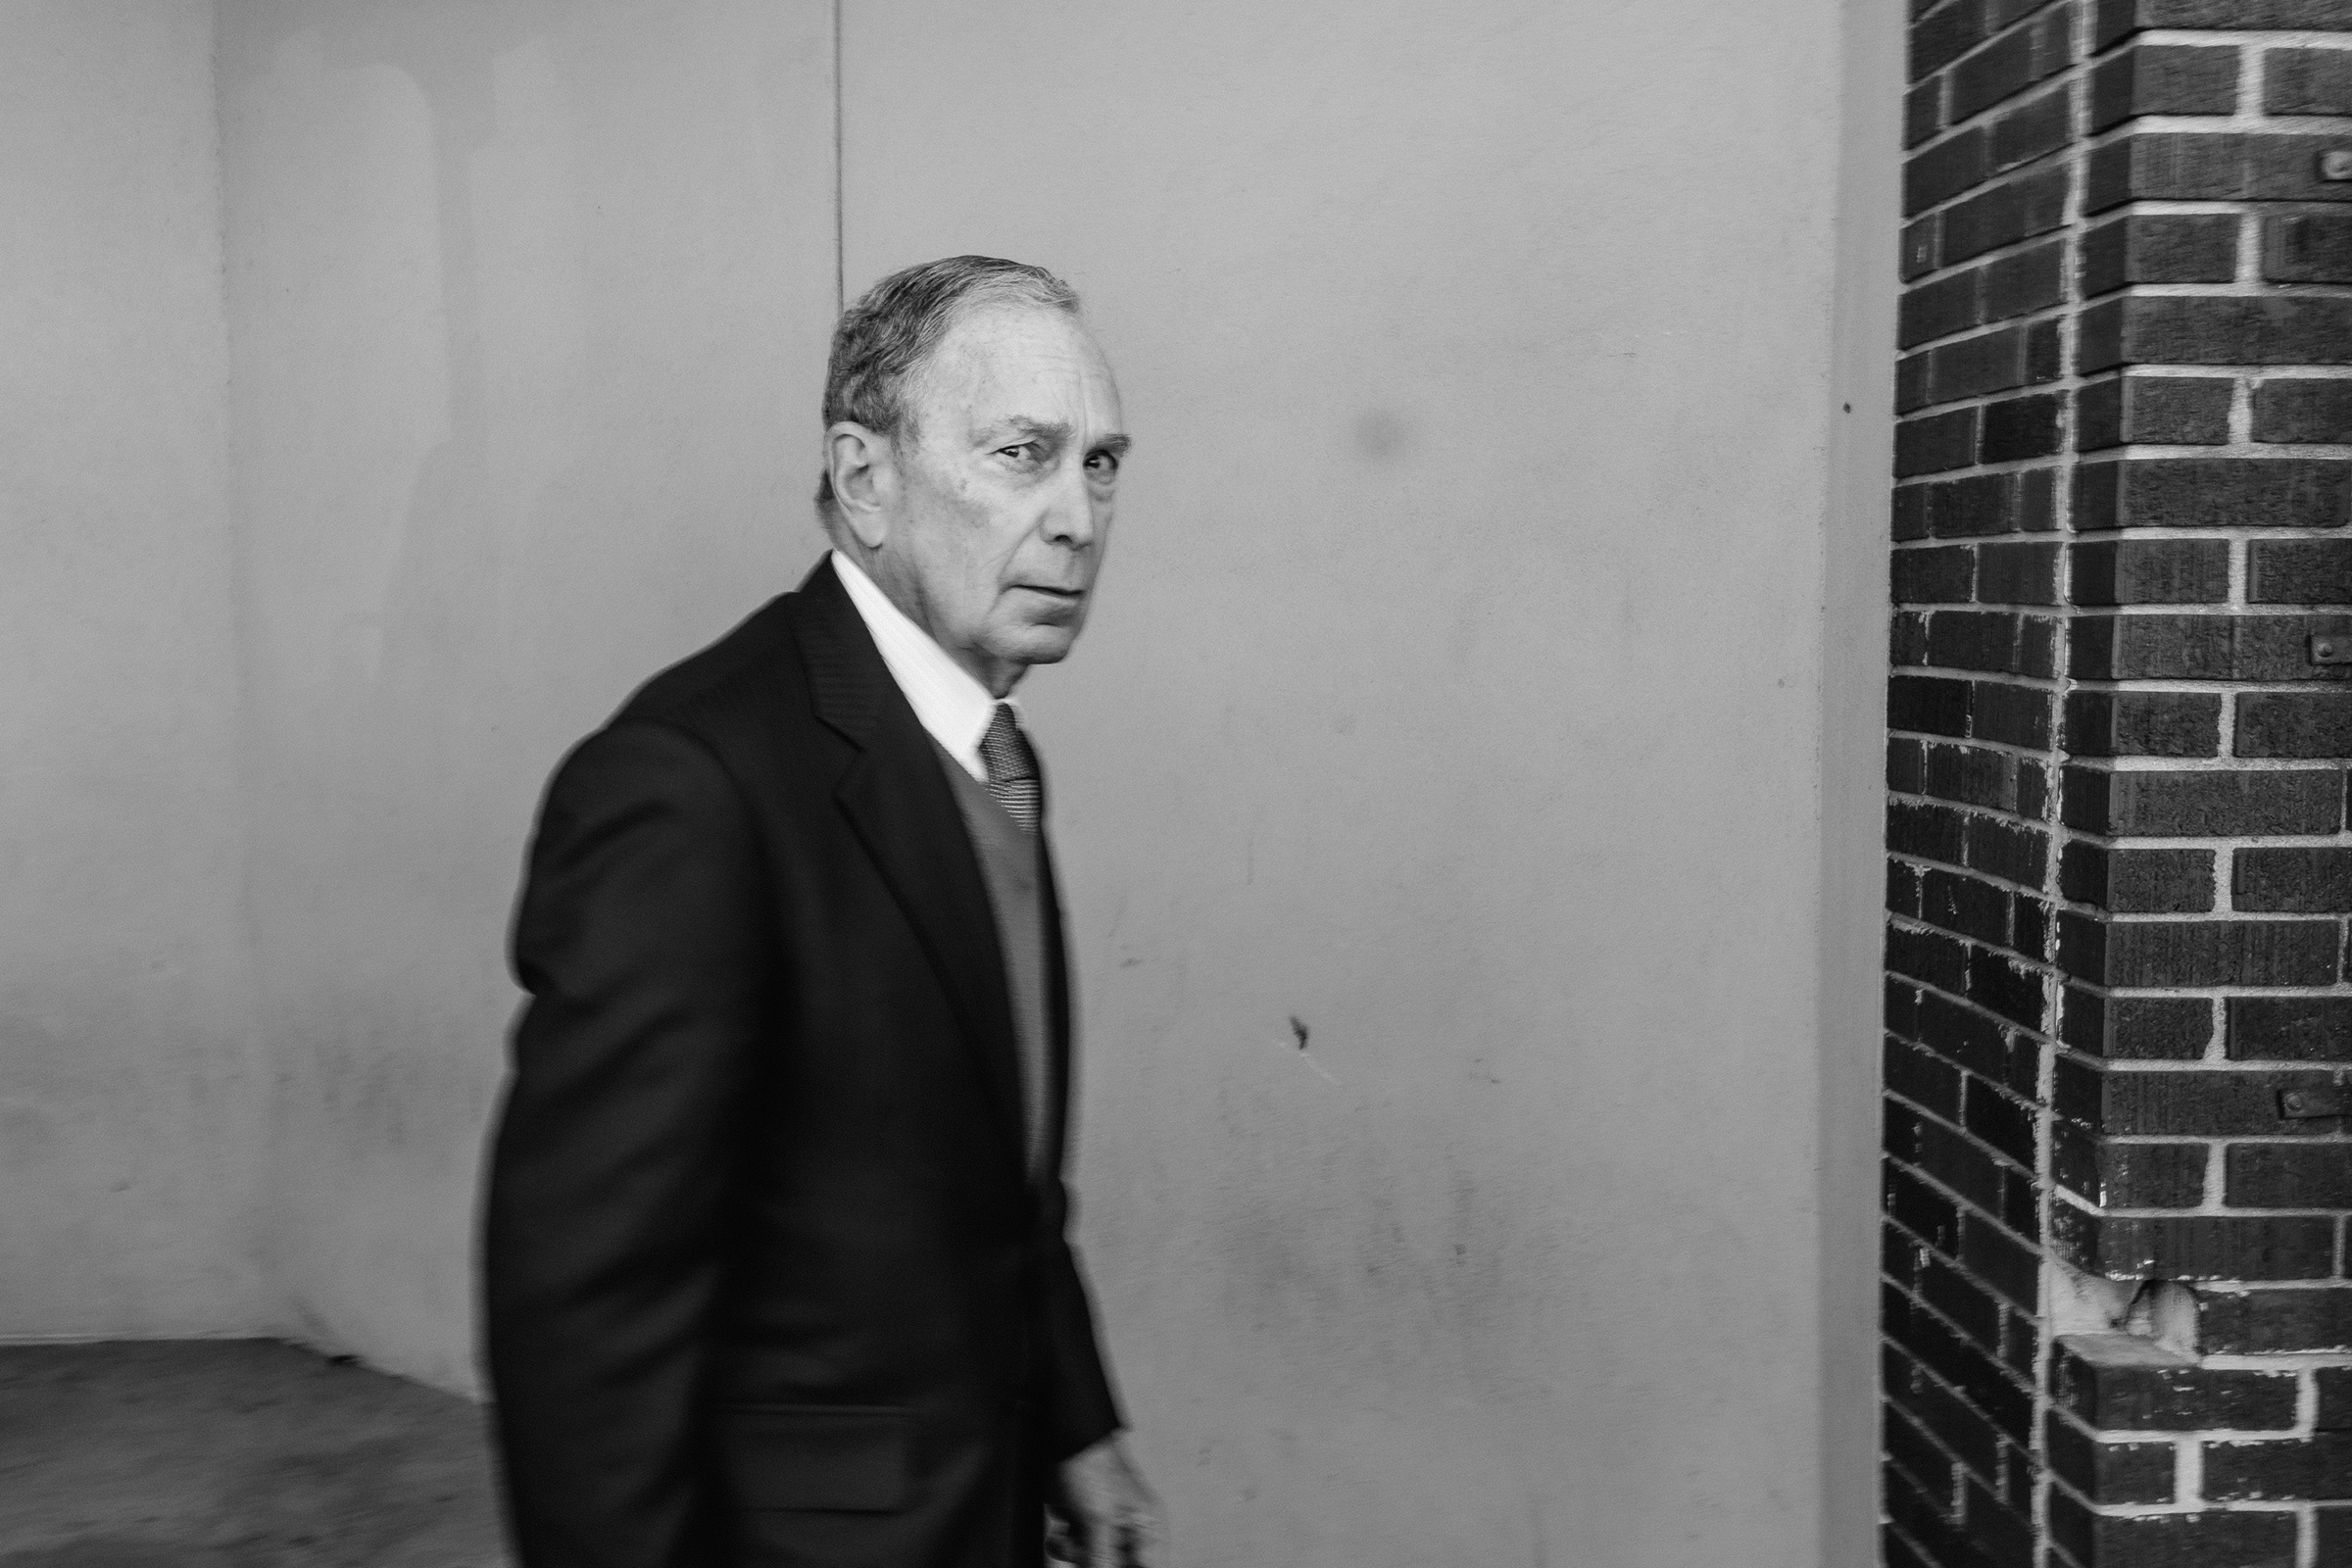 Former New York City Mayor and 2020 presidential candidate Mike Bloomberg leaves a rally in Memphis on Feb. 28. (Christopher Lee for TIME)